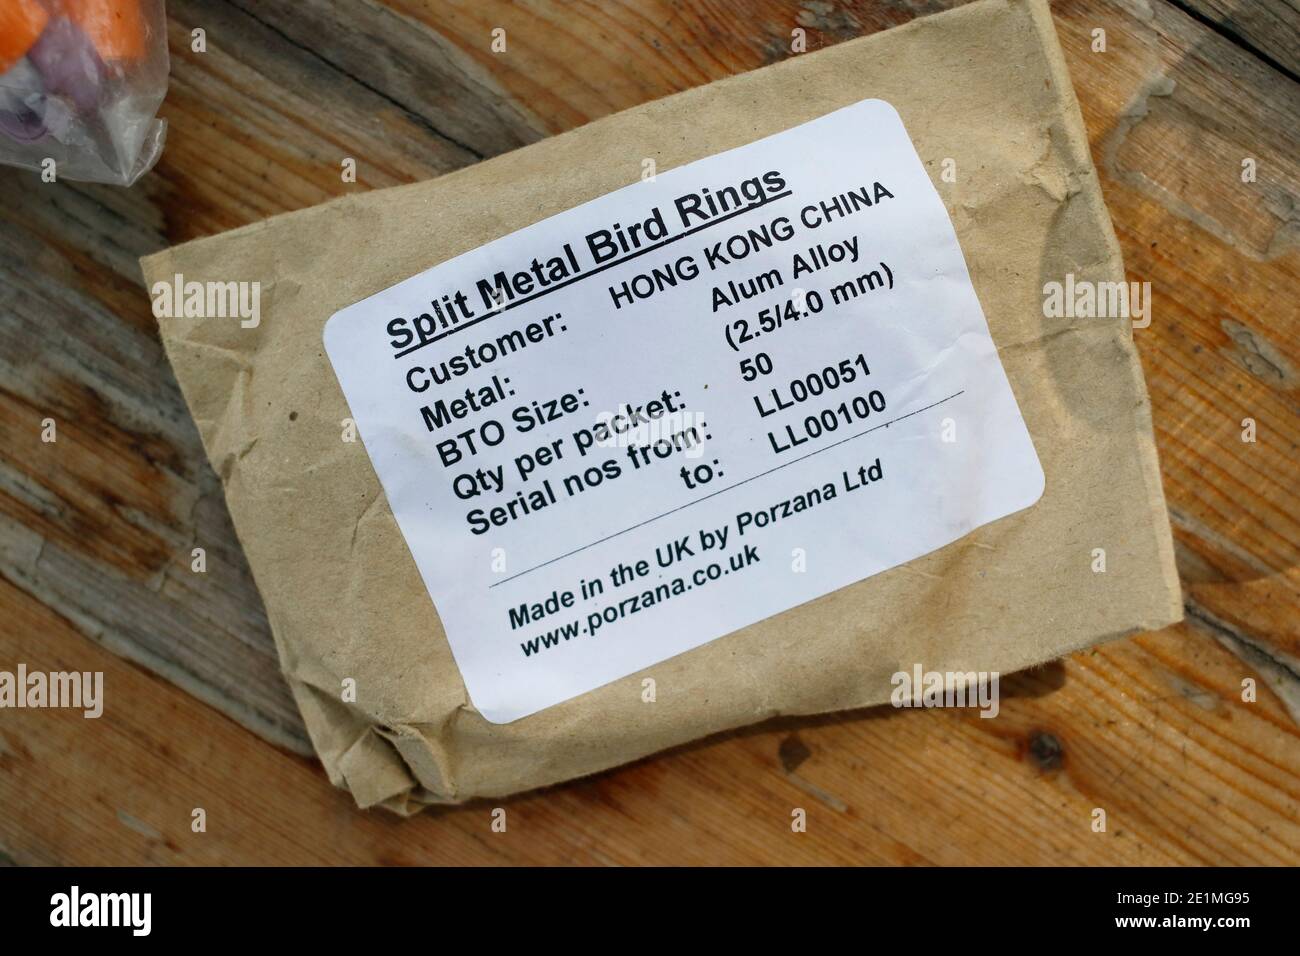 Packet of Split Metal Bird Rings (Bands), for research, Mai Po Nature Reserve, Hong Kong China 26th Sept 2015 Stock Photo